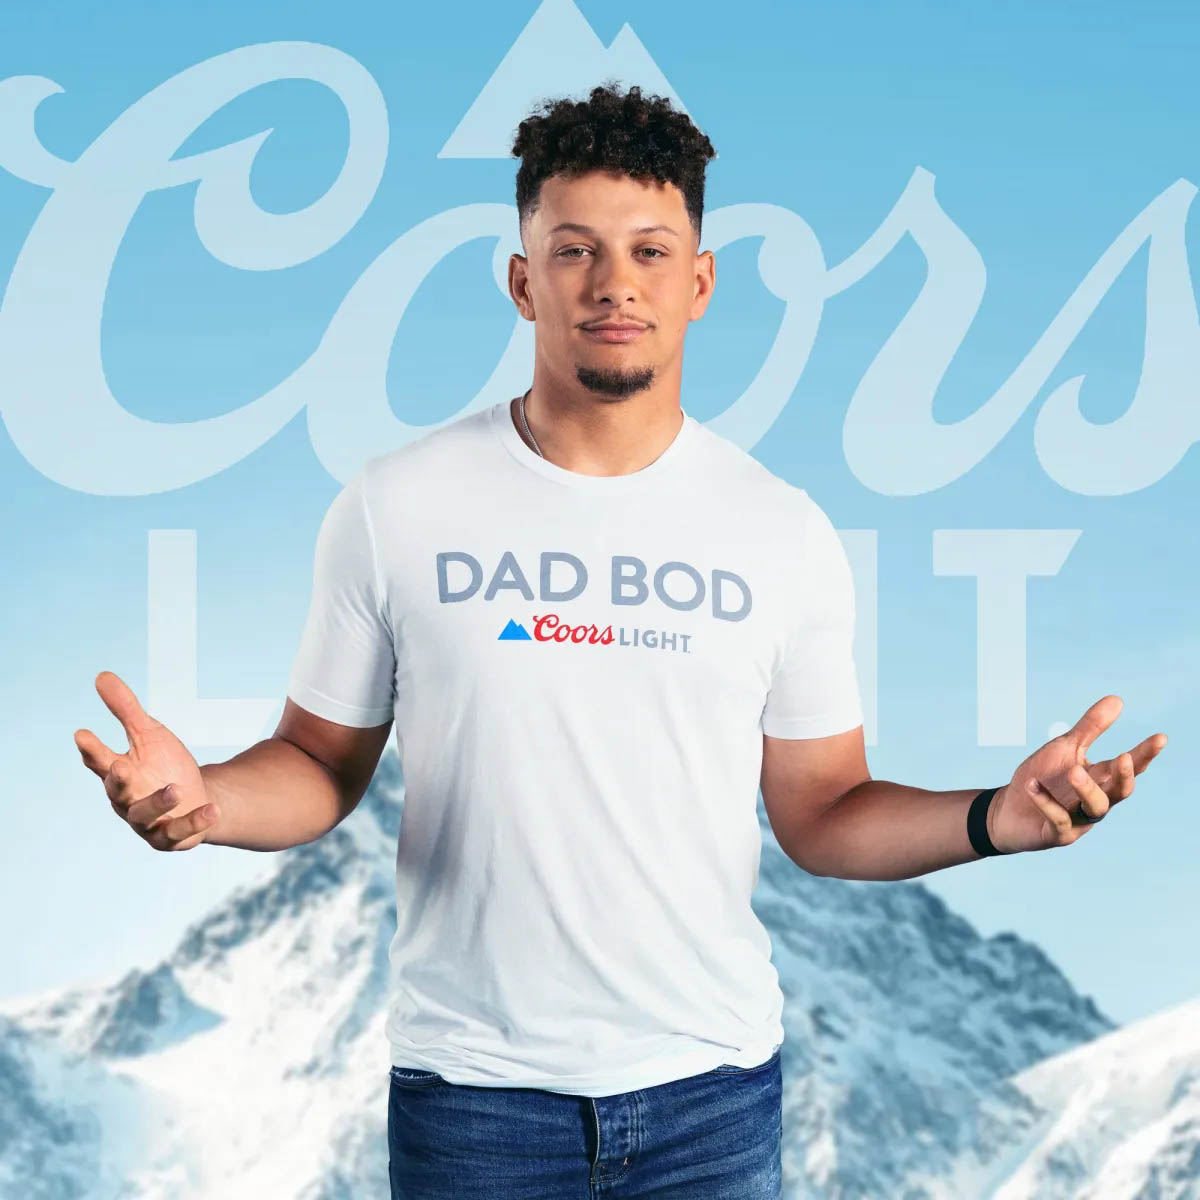 Mahomes has taken advantage of his dad bod in a partnership with Coors Light